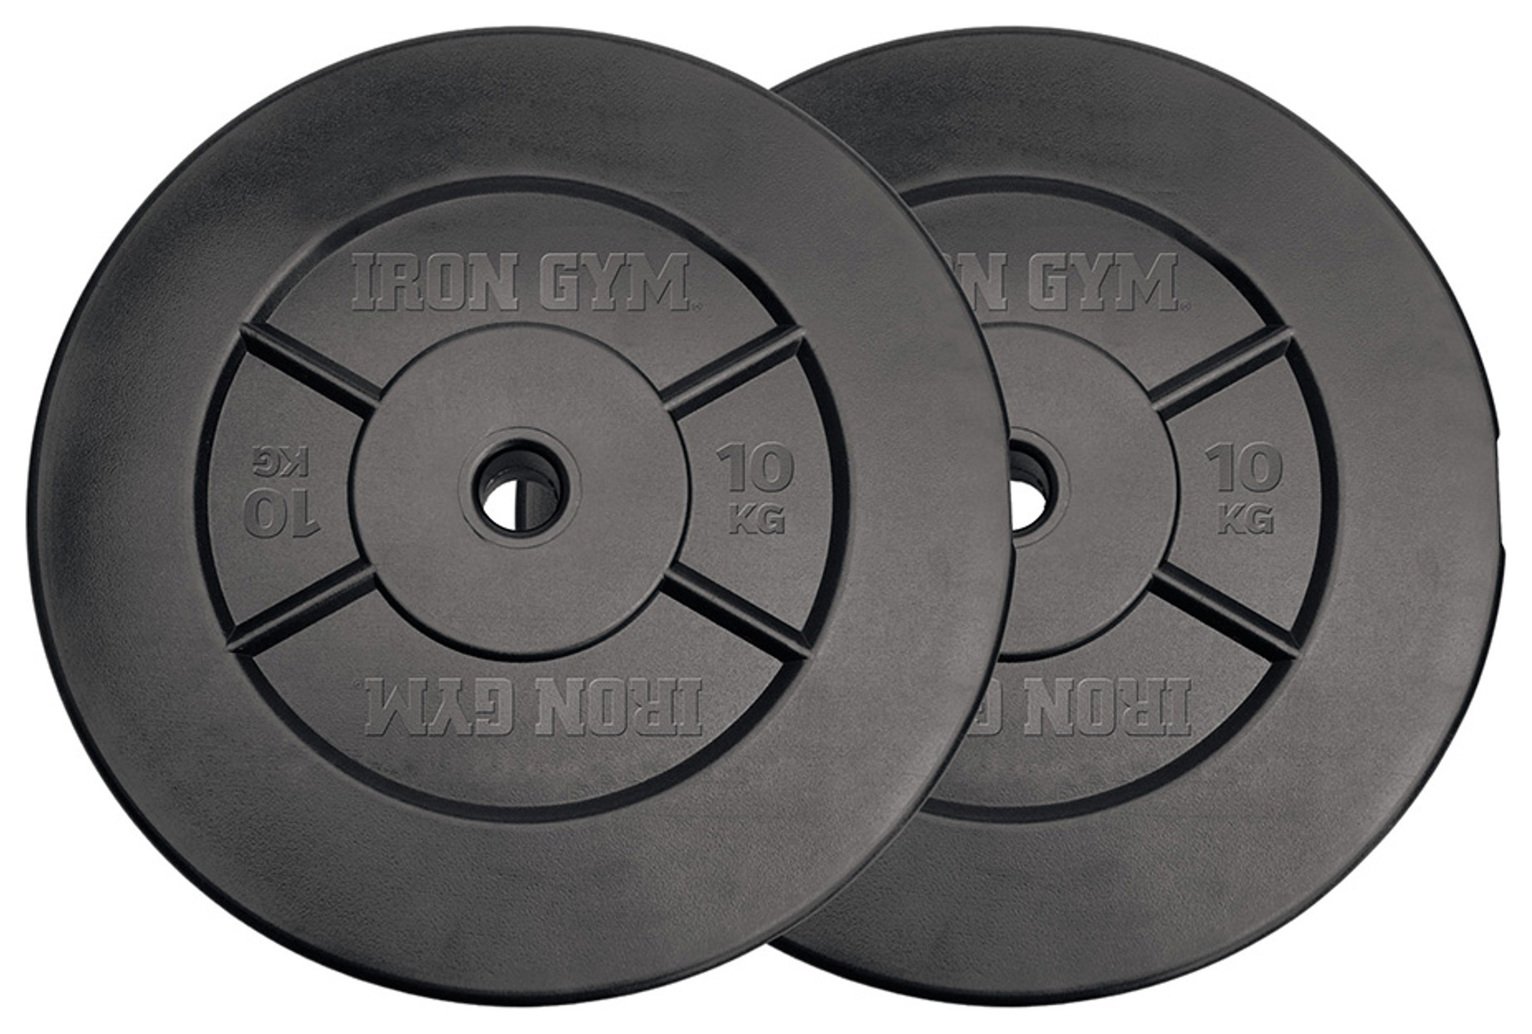 Iron Gym Vinyl Weight Plates review